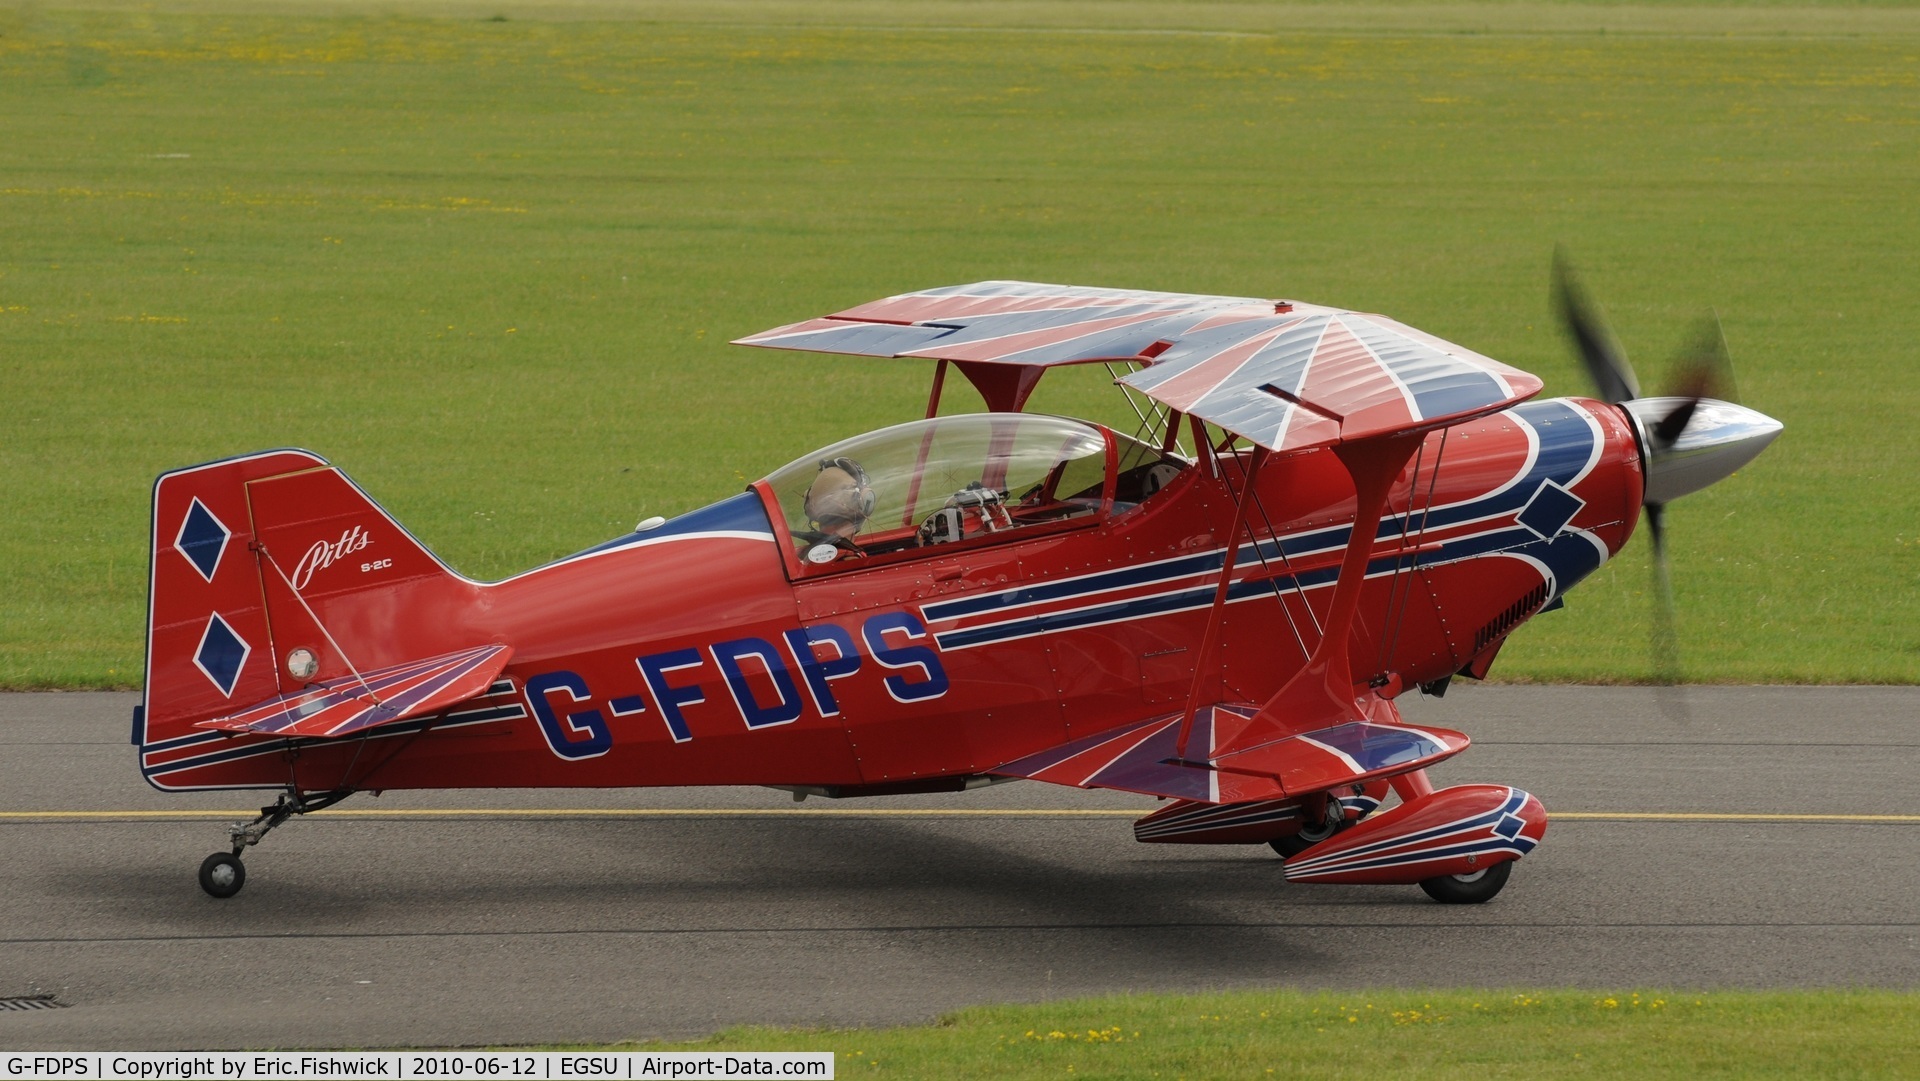 G-FDPS, 2004 Aviat Pitts S-2C Special C/N 6066, 2. G-FDPS at The Duxford Trophy Aerobatic Contest, June 2010